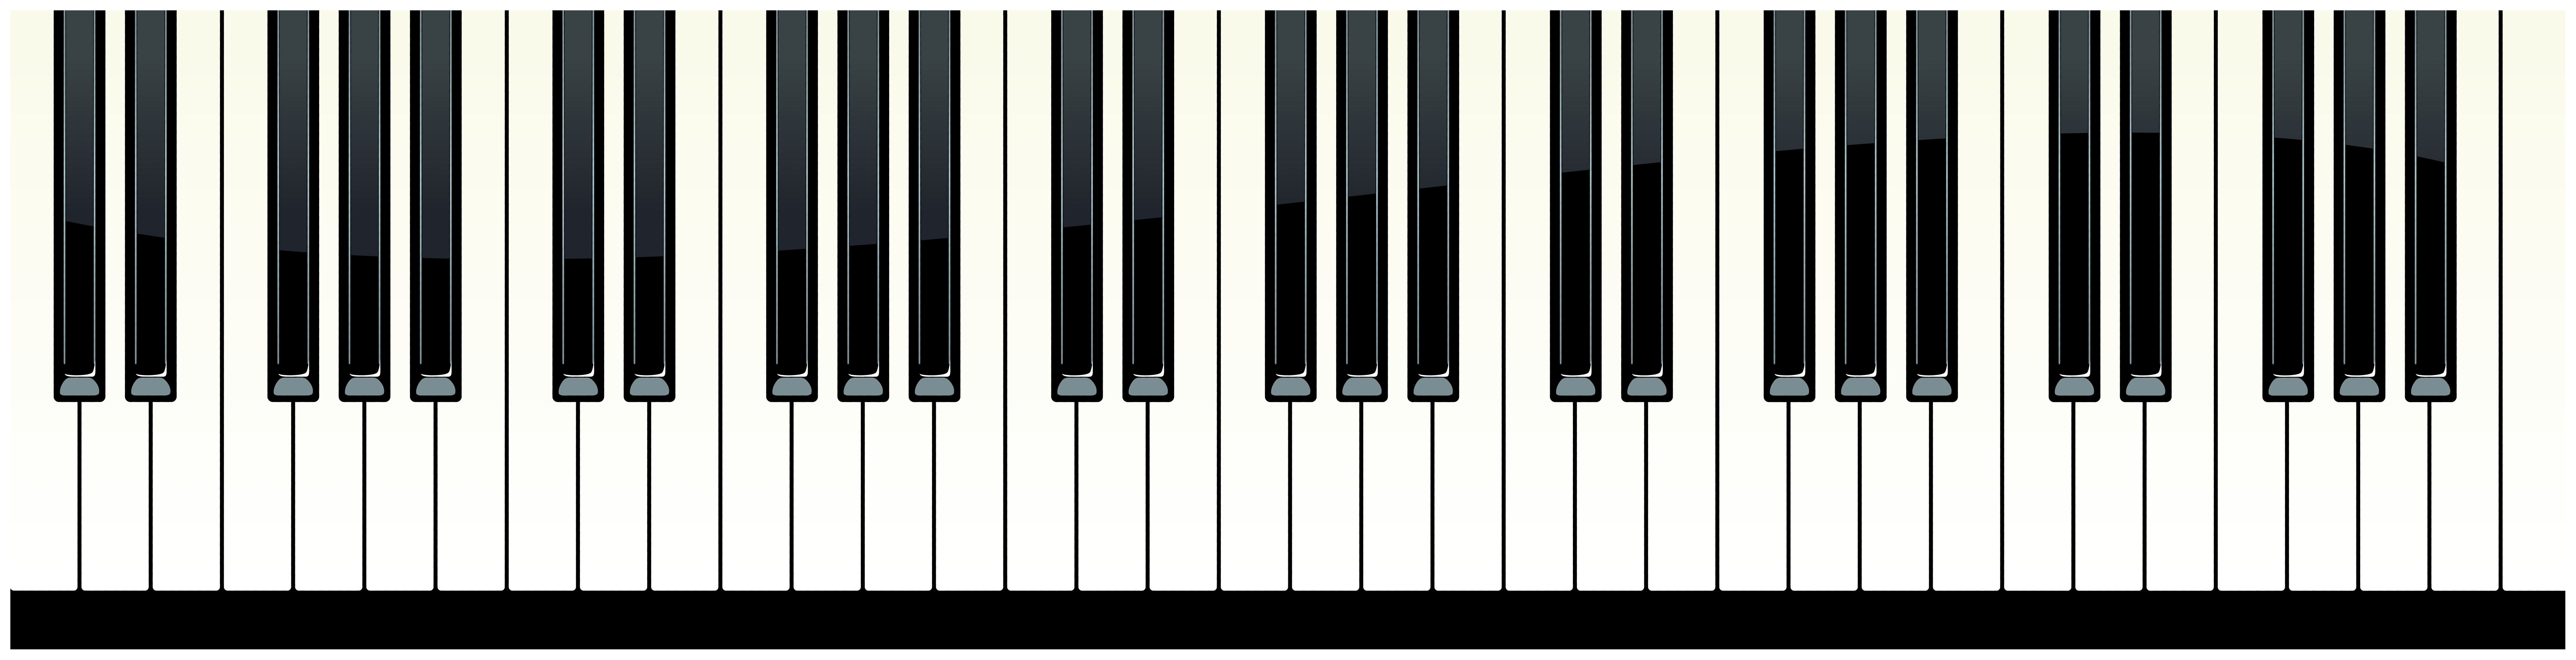 Piano Keys PNG Image in High Definition pngteam.com